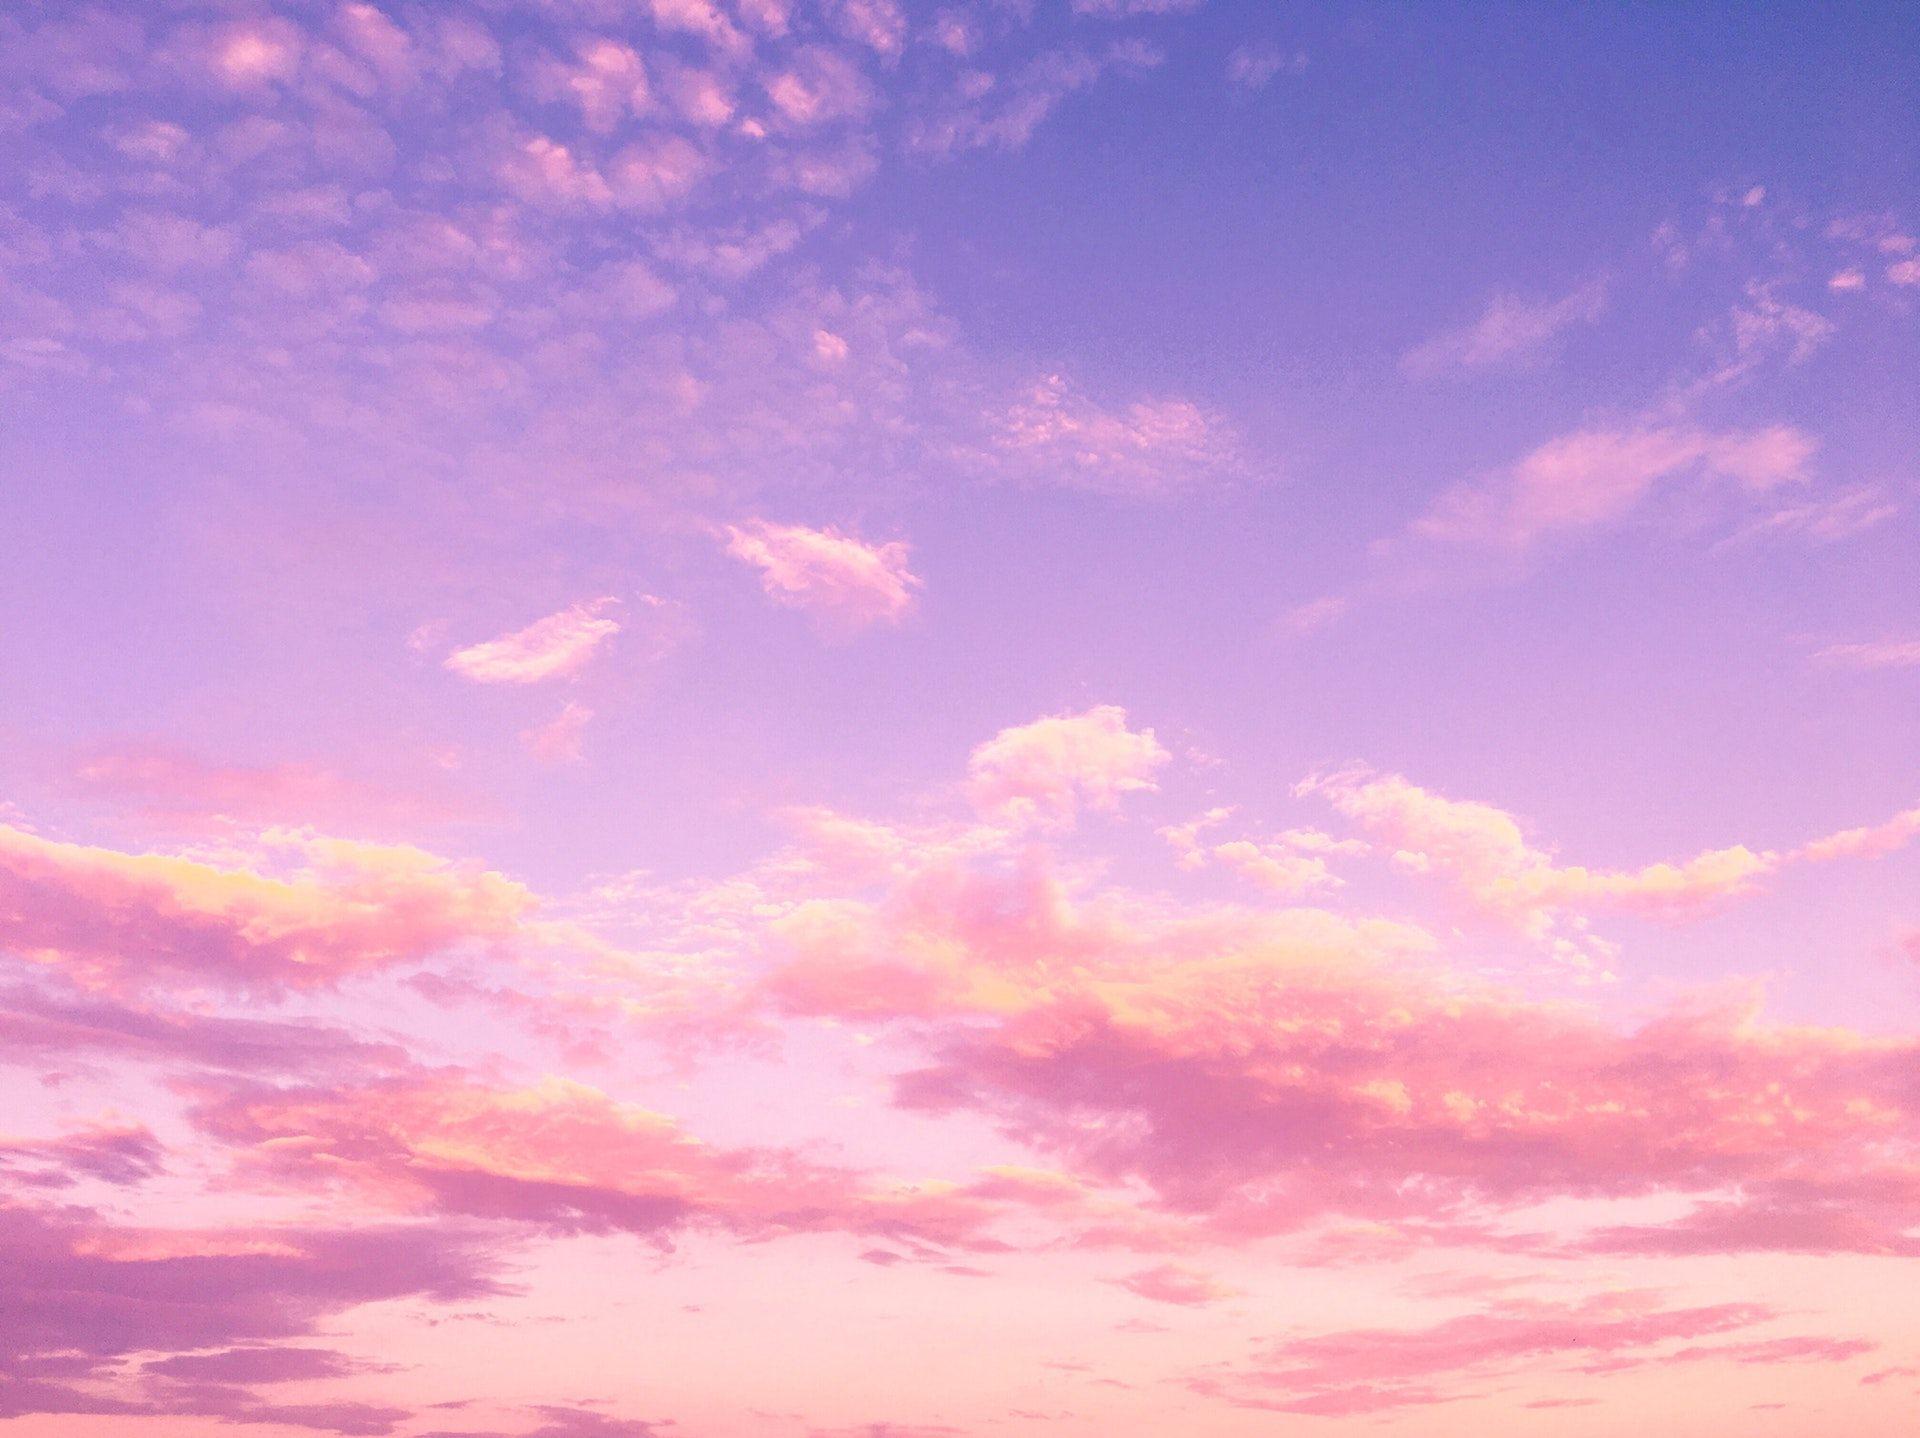 Beautiful Pink Sky Wallpaper Download HD Image for Free